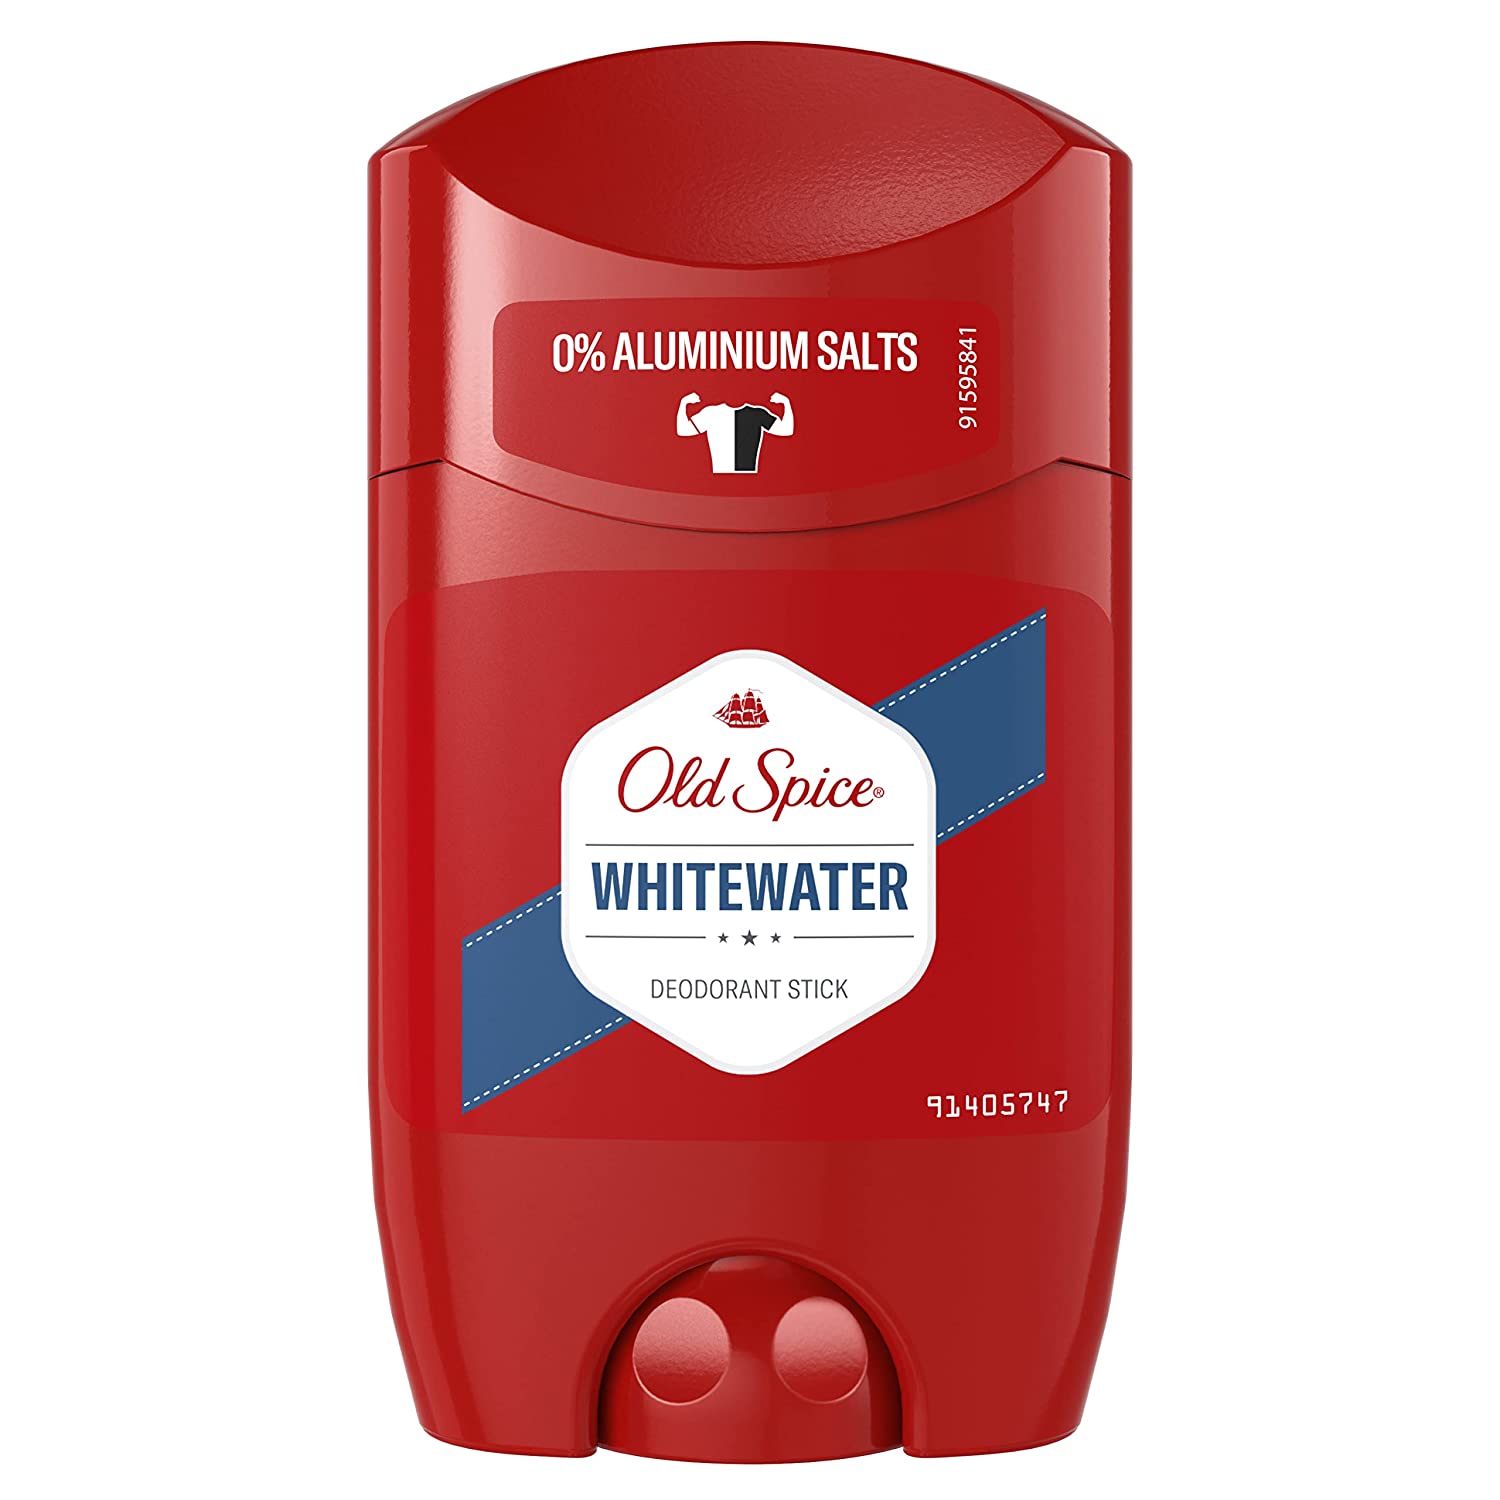 Old Spice Whitewater Deodorant Stick 50 ml Deodorant Stick Without Aluminium for Men Men Deodorant with Long-Lasting Fragrance